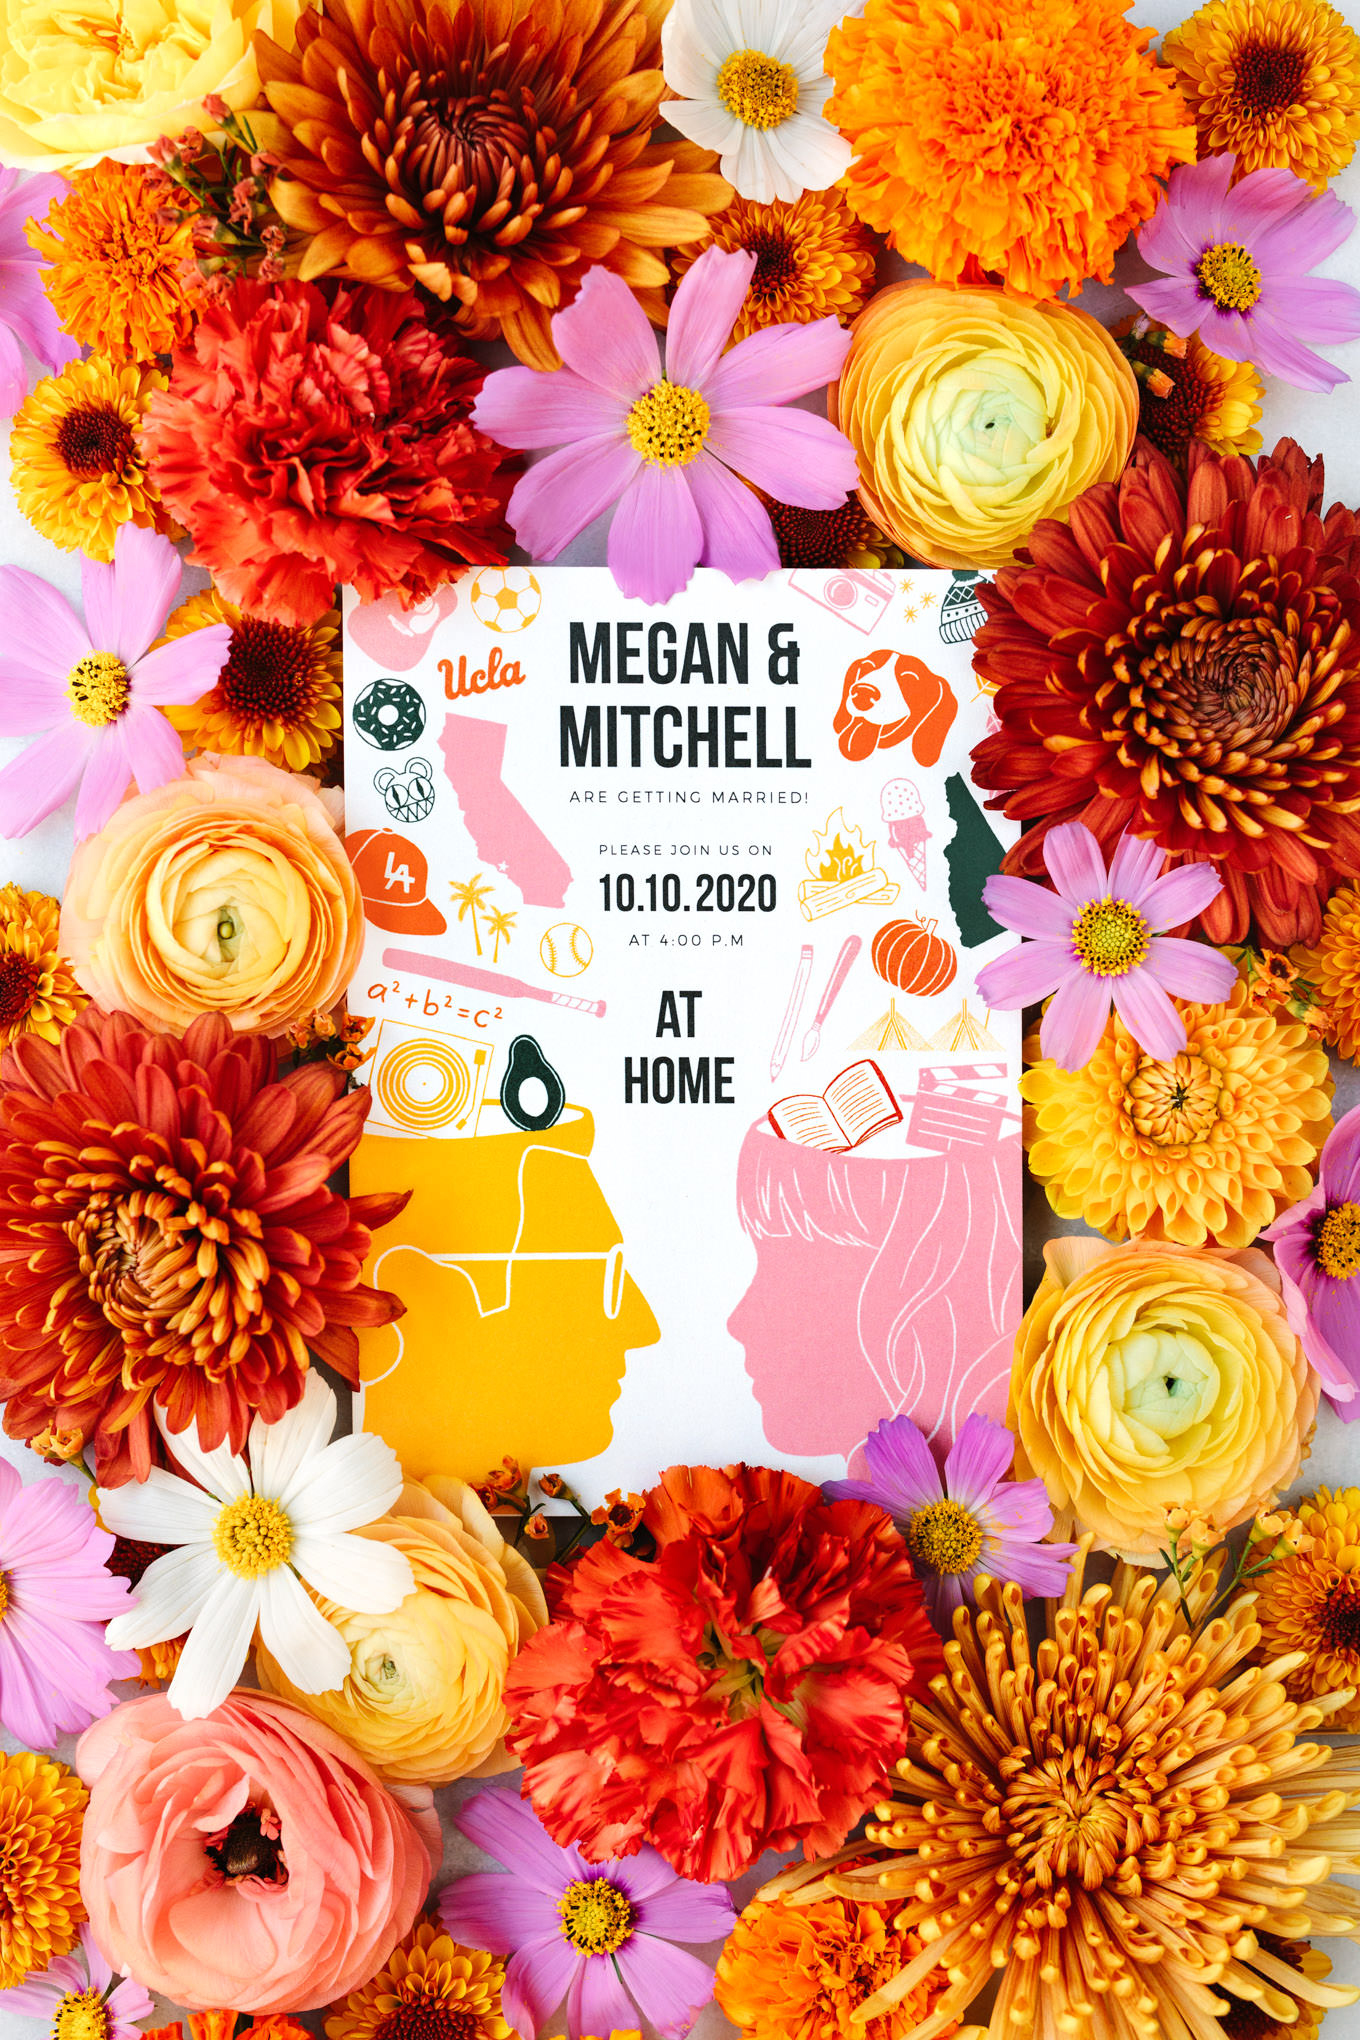 Warm, vibrant colored wedding invitation and florals | Vibrant backyard micro wedding featured on Green Wedding Shoes | Colorful LA wedding photography | #losangeleswedding #backyardwedding #microwedding #laweddingphotographer Source: Mary Costa Photography | Los Angeles